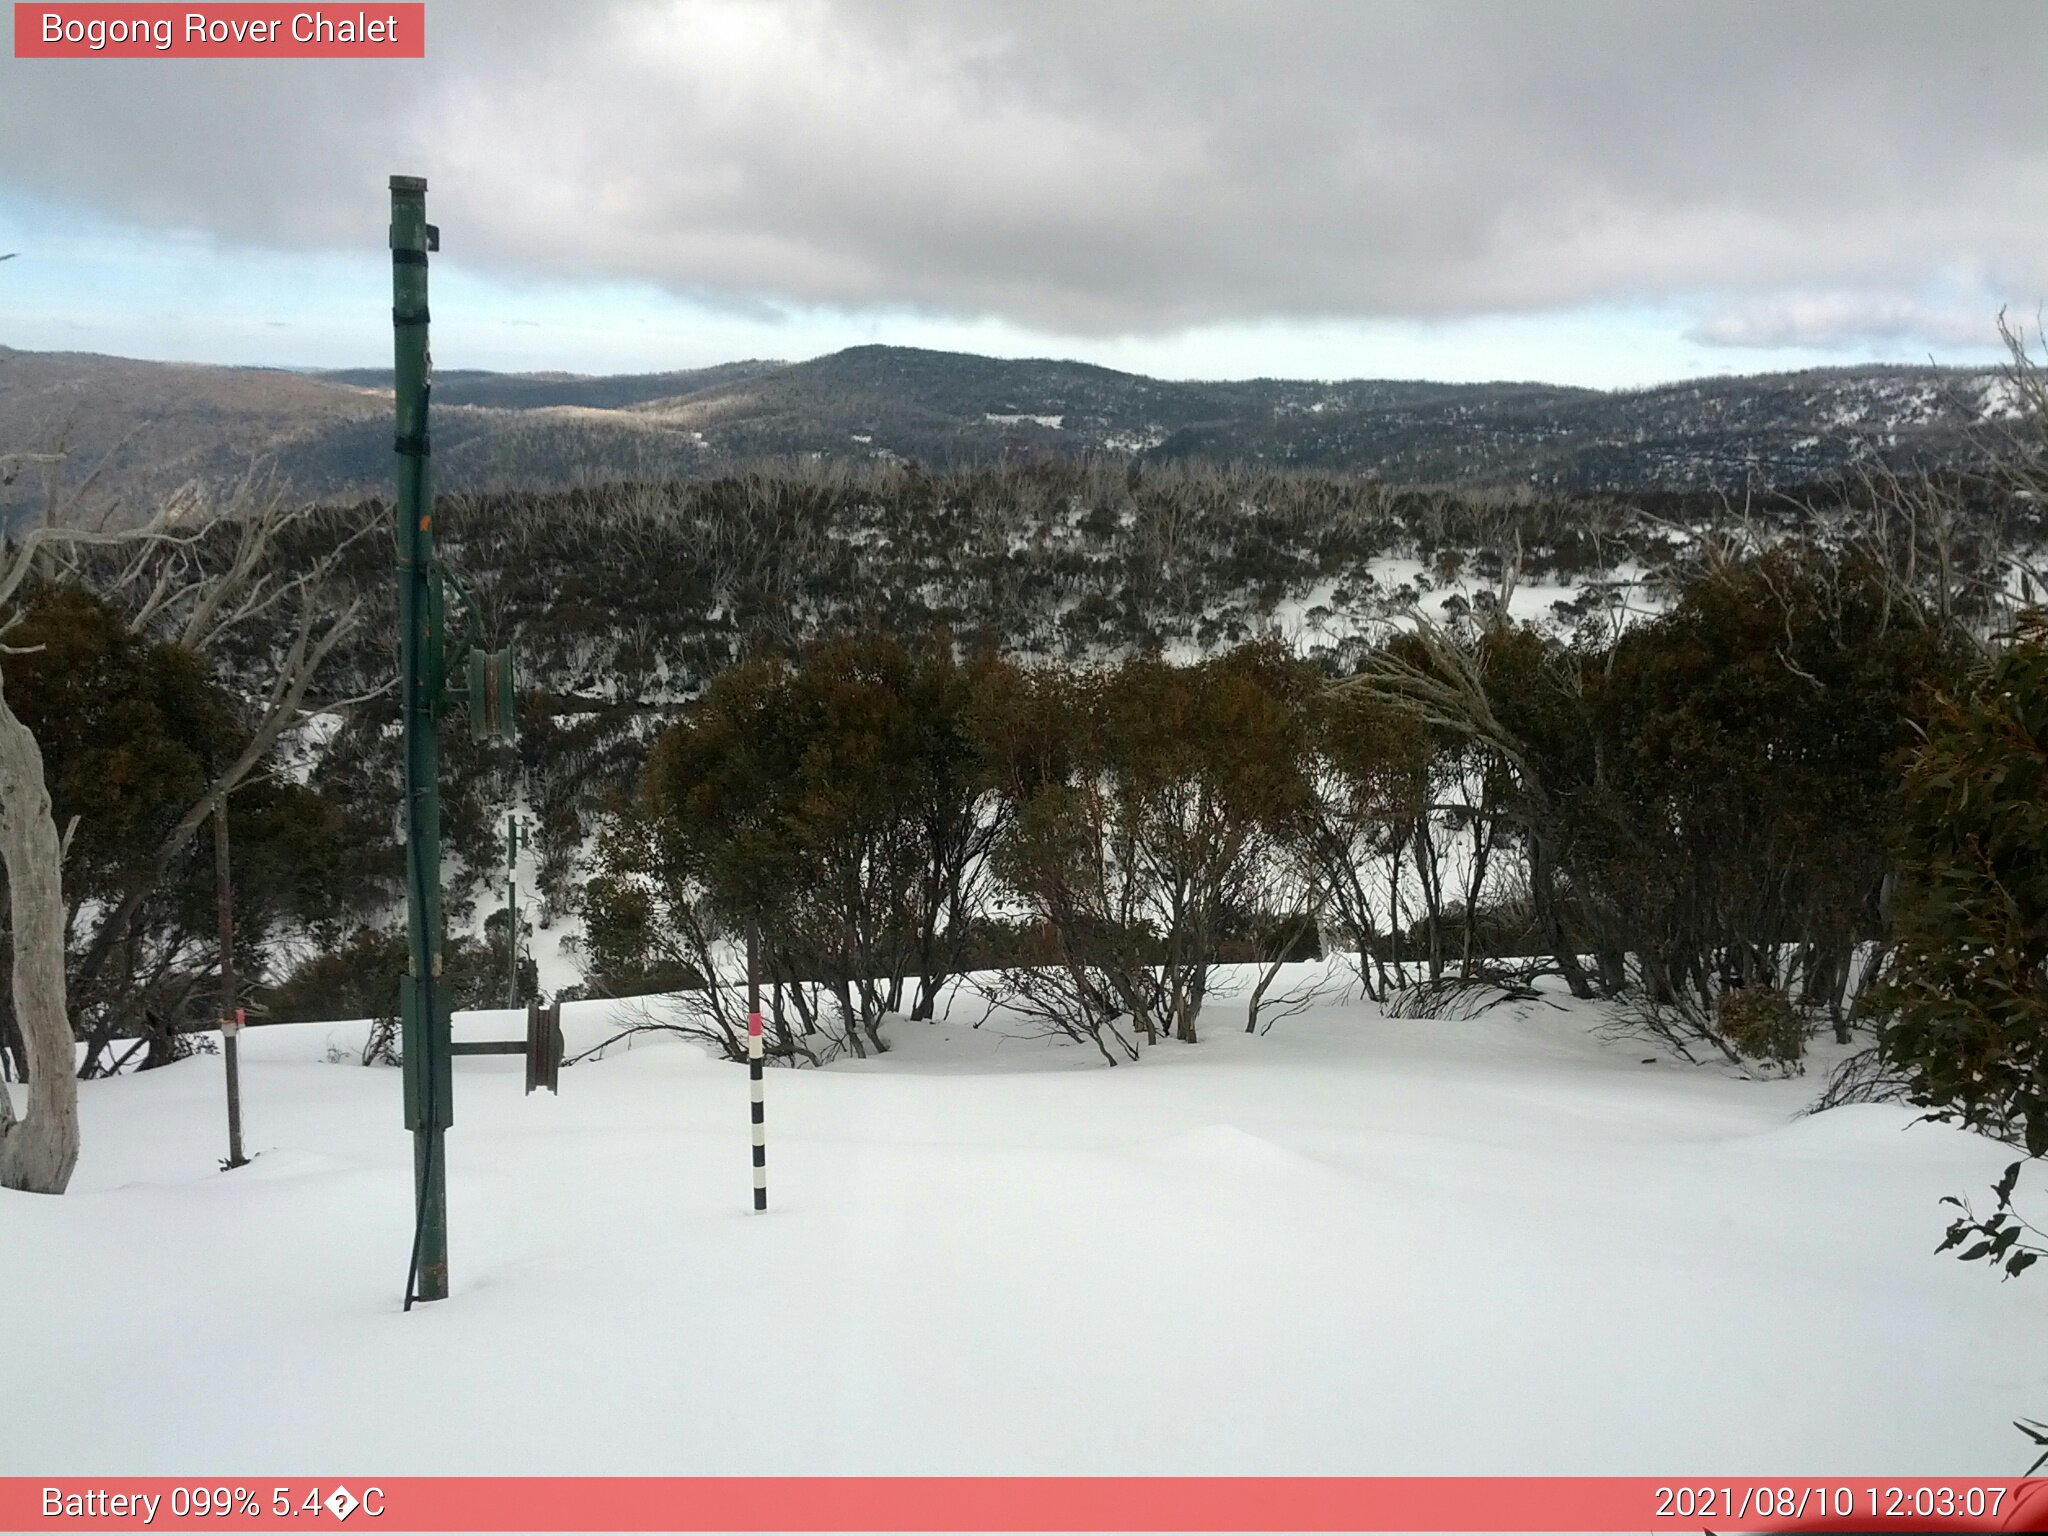 Bogong Web Cam 12:03pm Tuesday 10th of August 2021